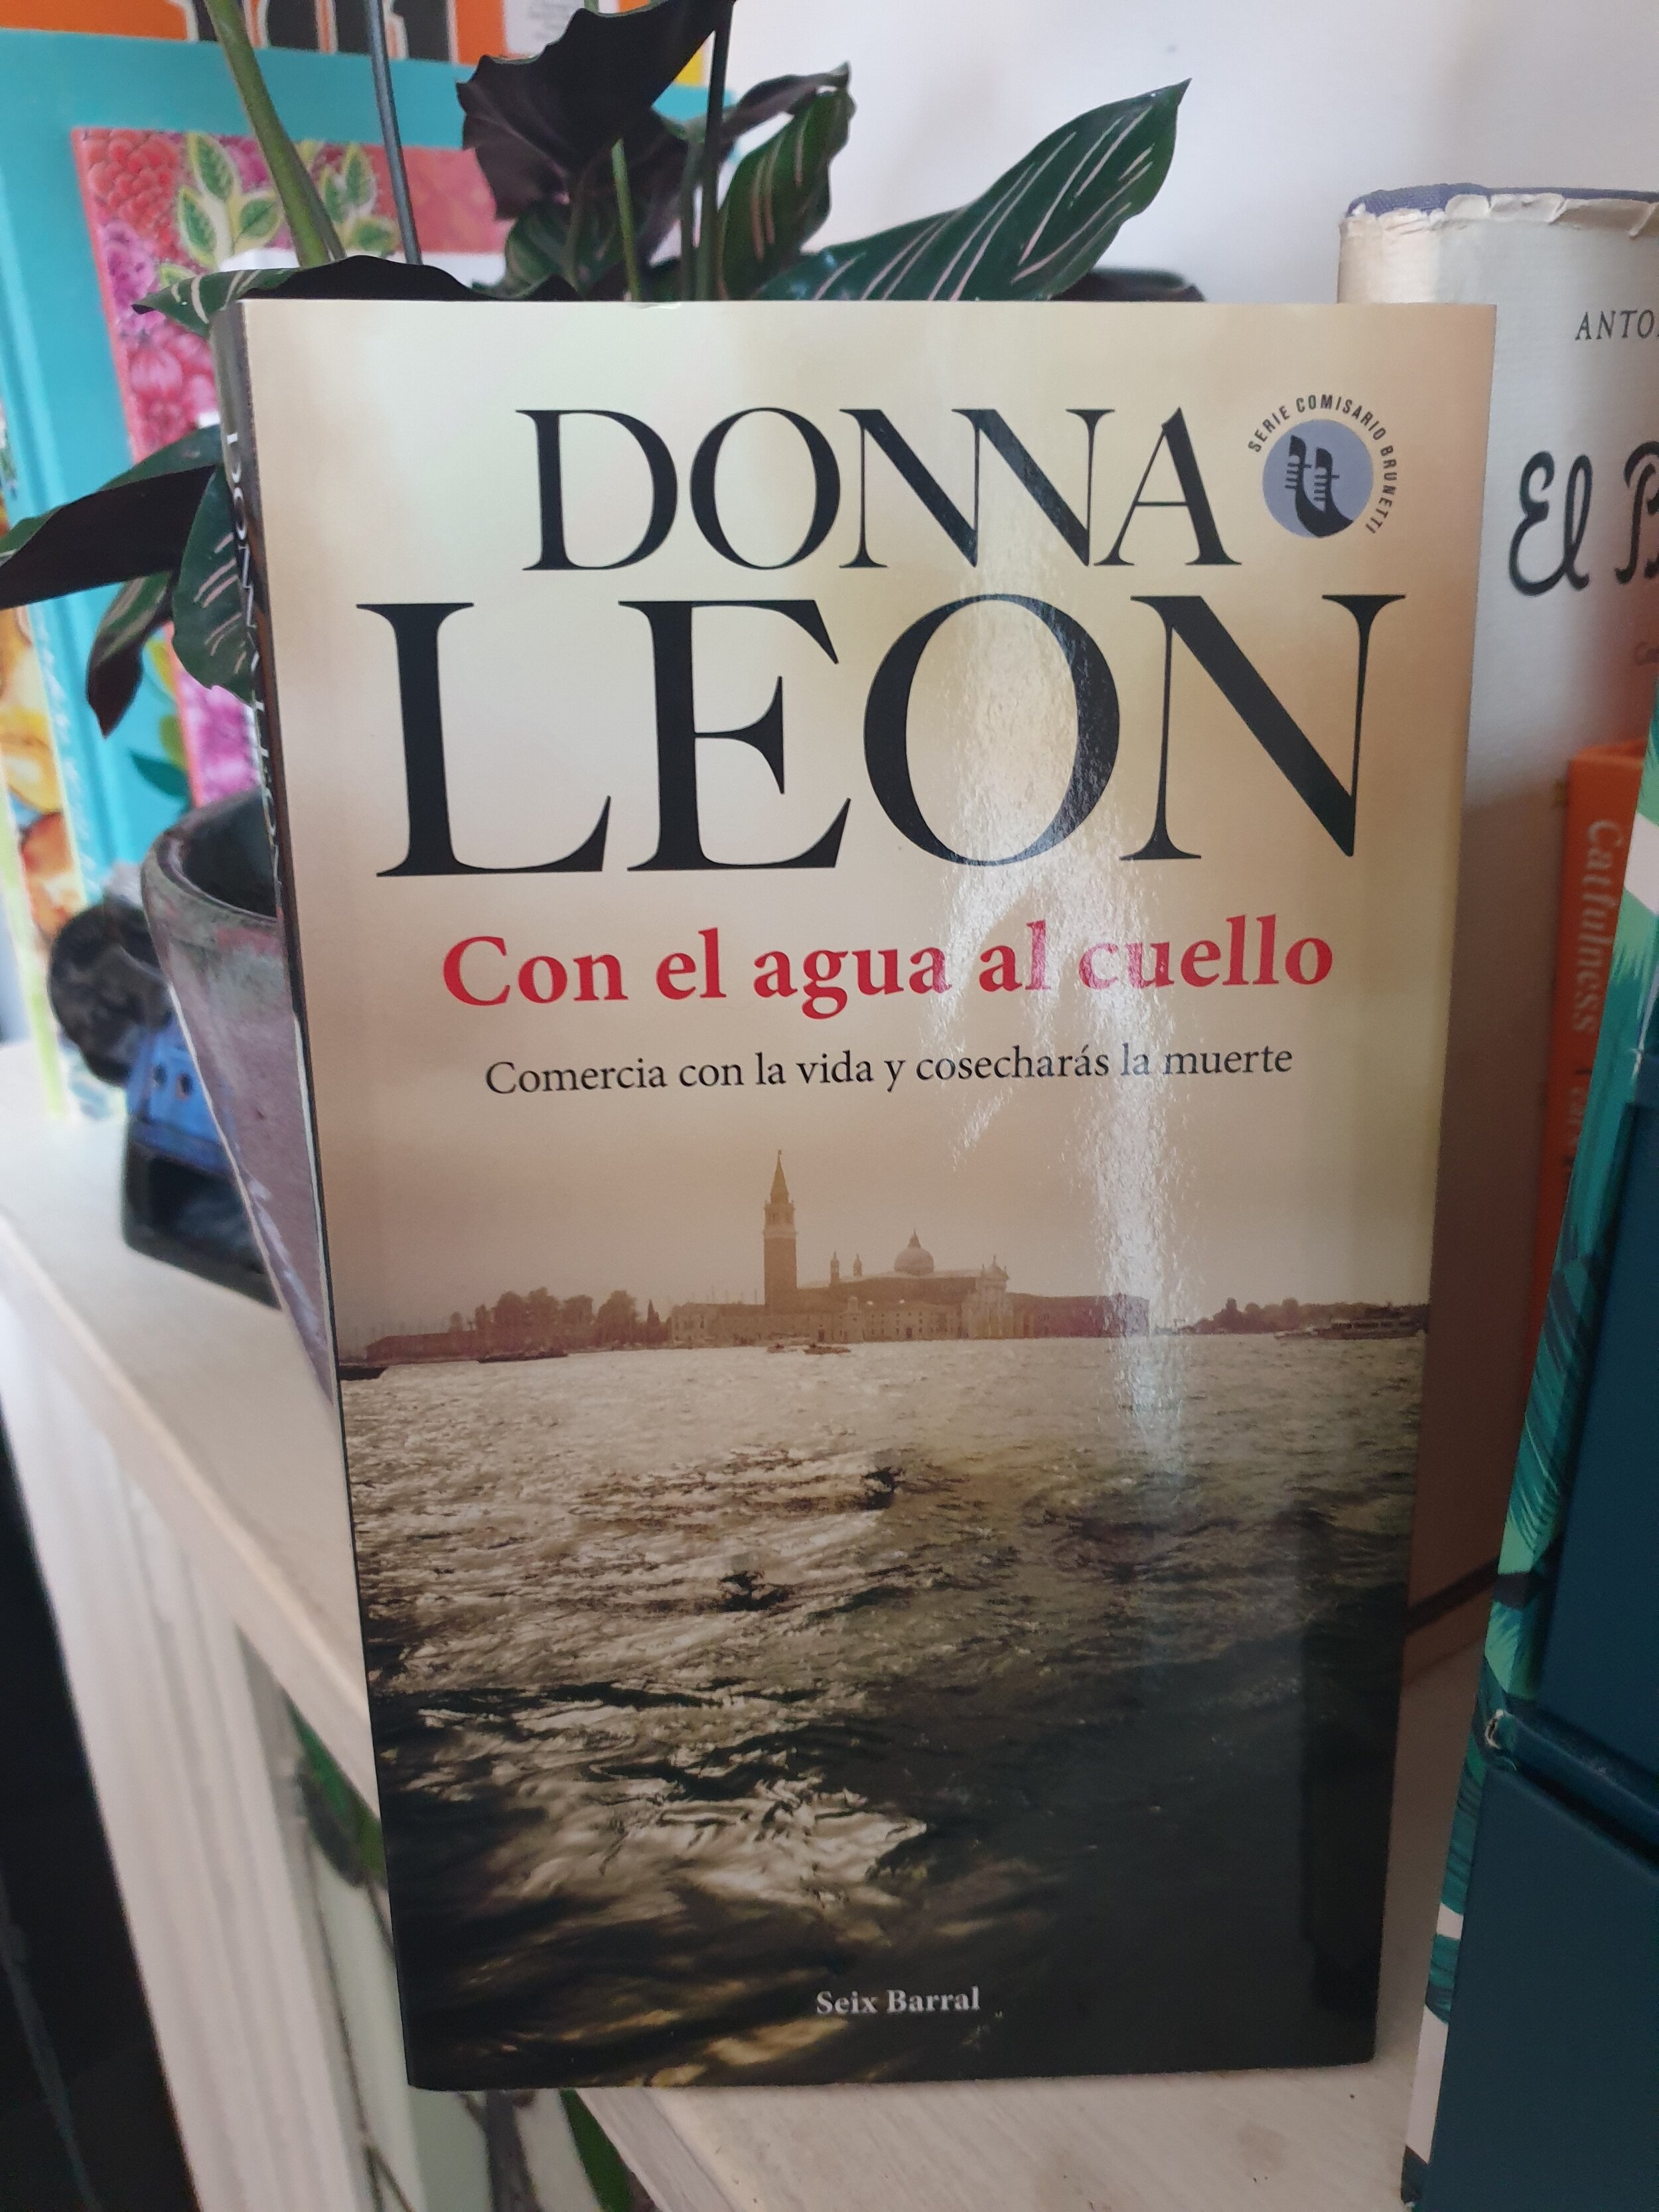 Book Review 1 - Donna Leon.jpg